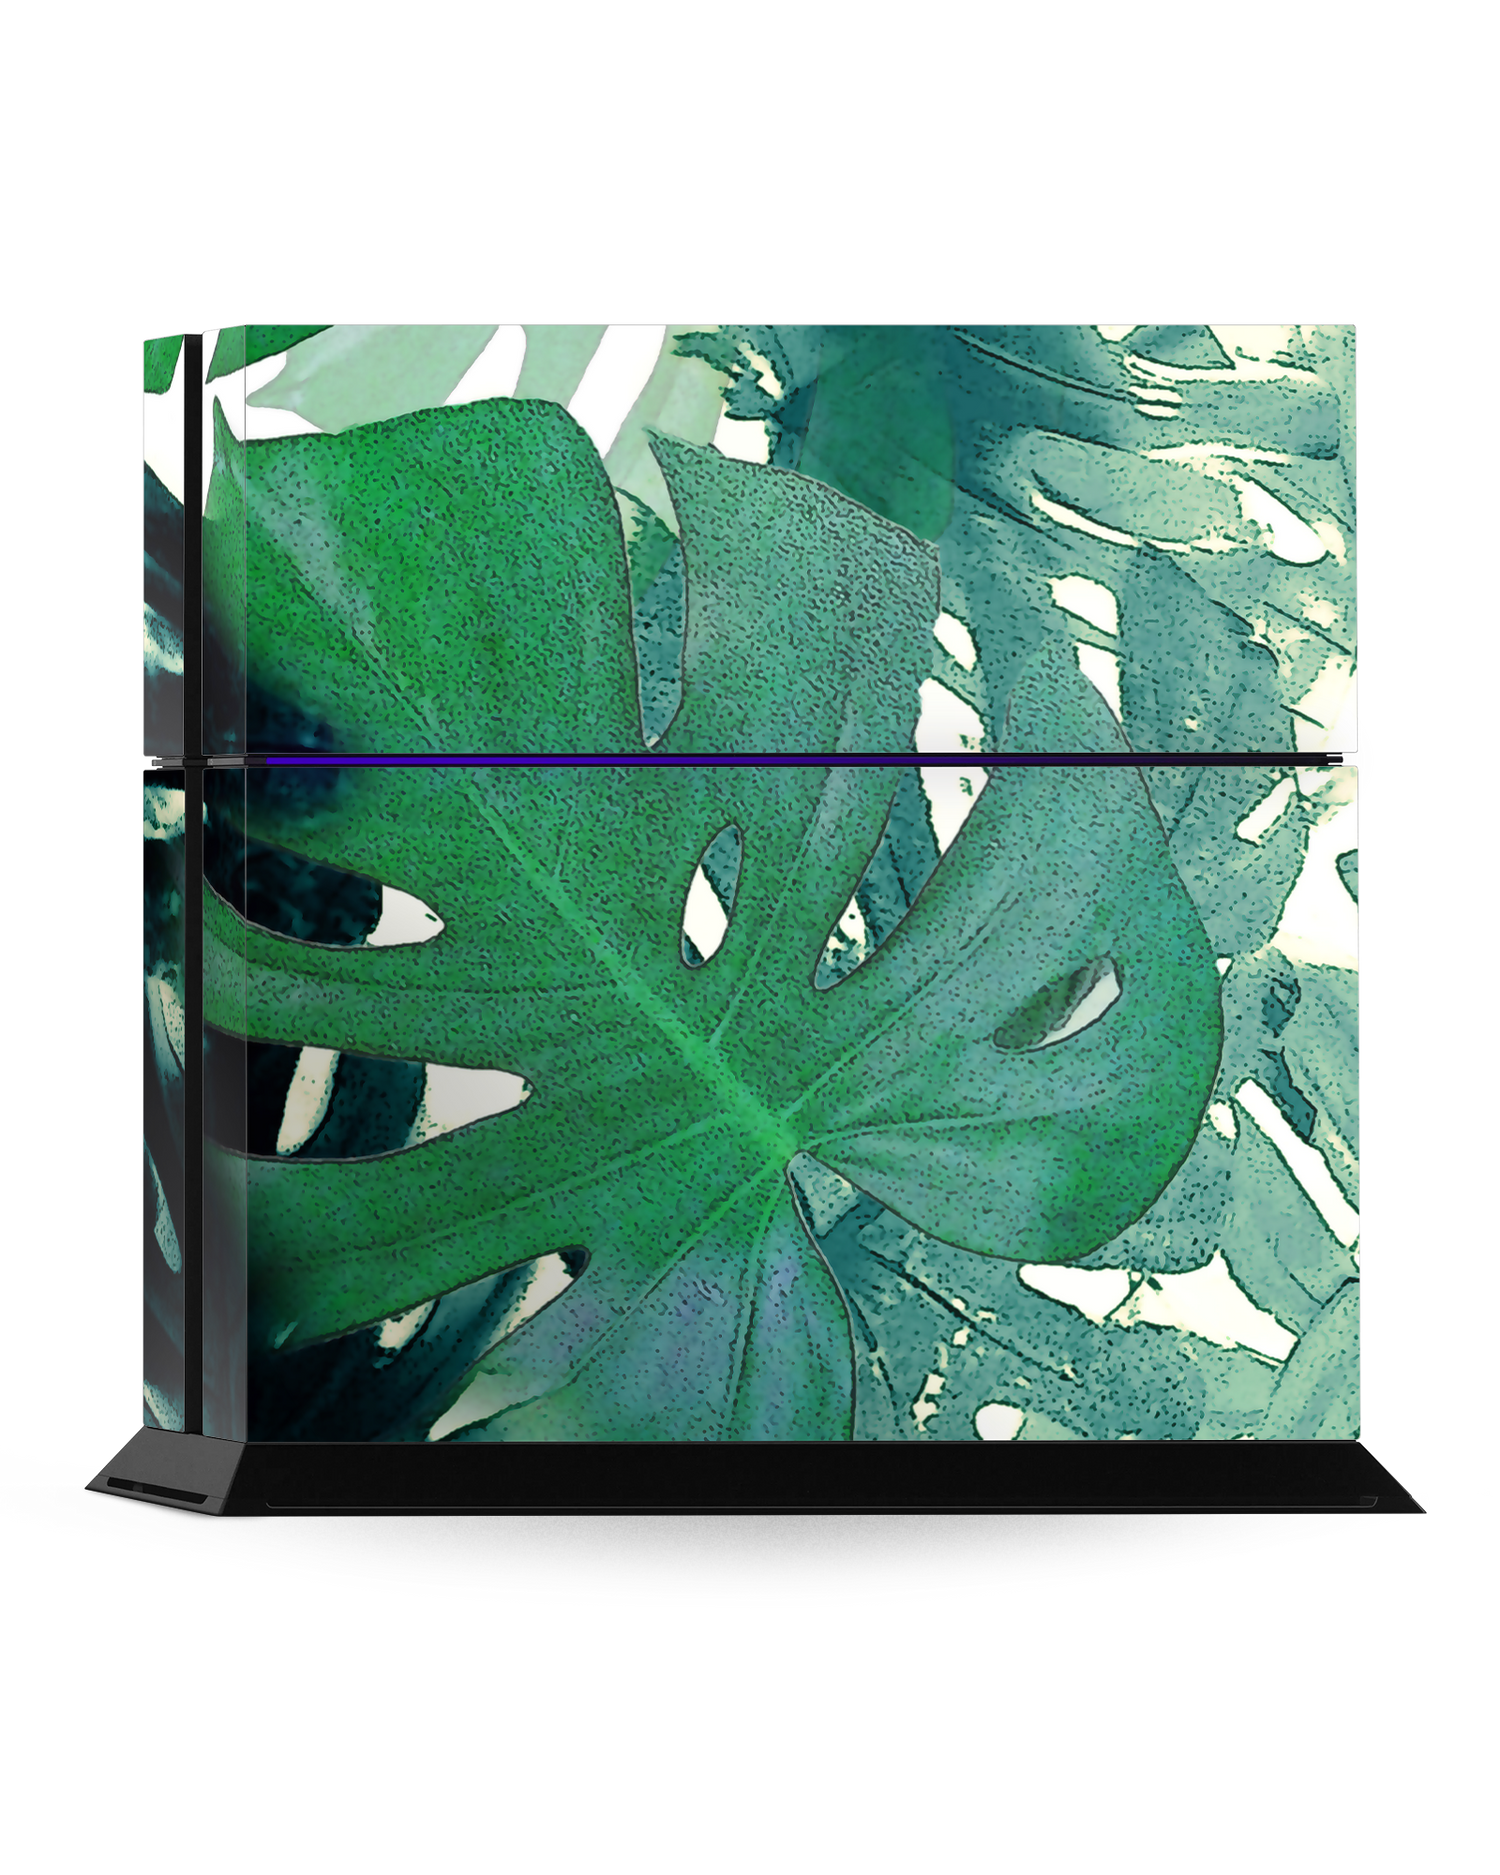 Saturated Plants Console Skin for Sony PlayStation 4: Standing